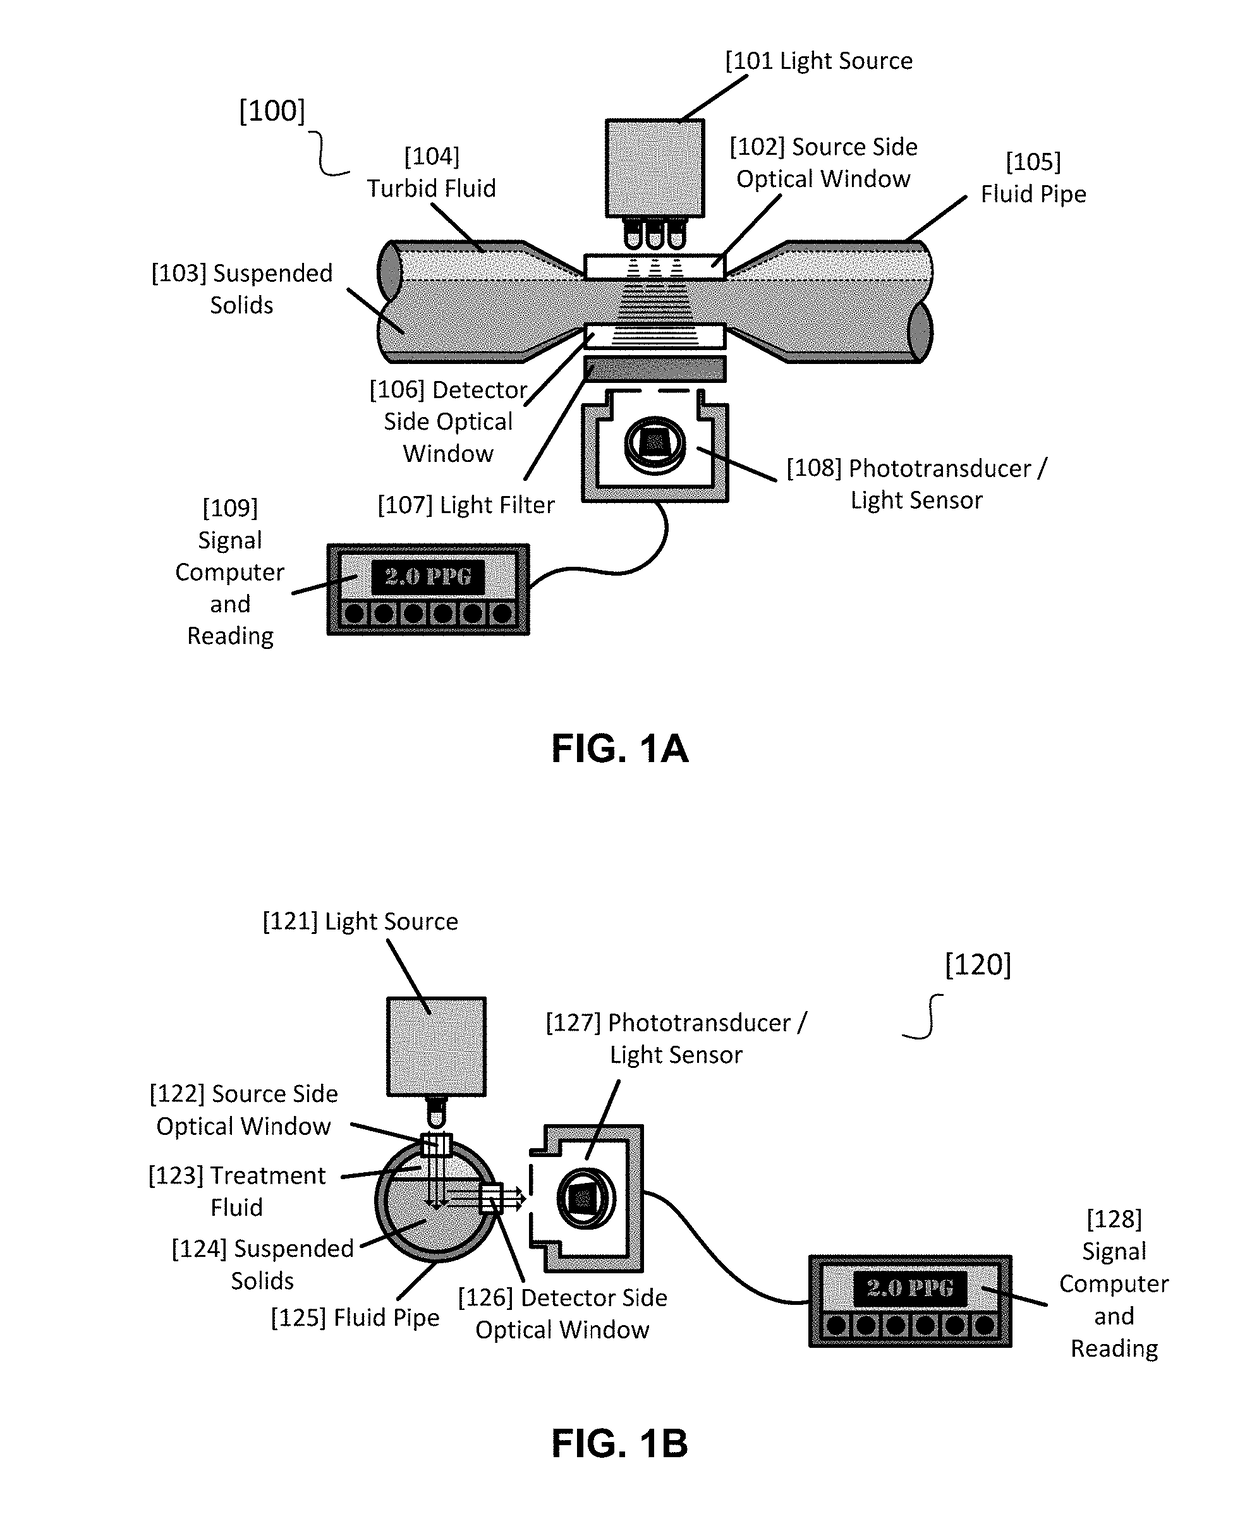 Photometer/nephelometer device and method of using to determine proppant concentration